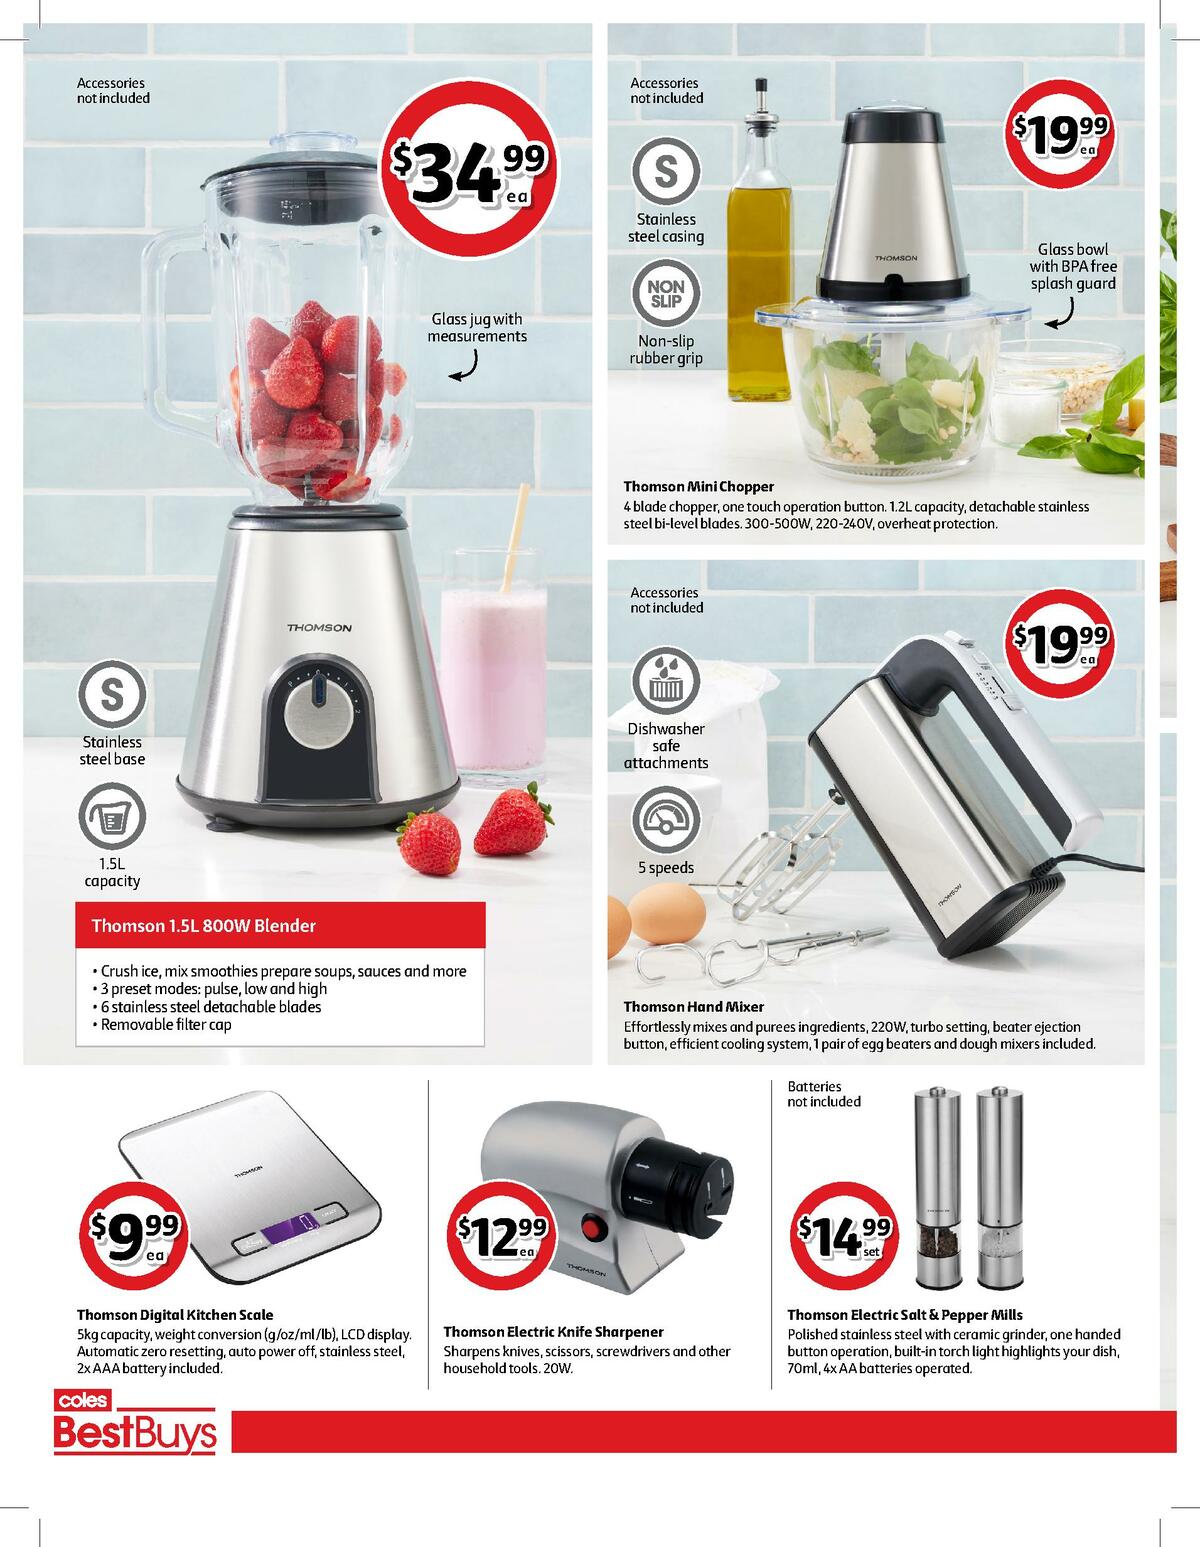 Coles Best Buys - Cookware and Appliances Catalogues from 5 February